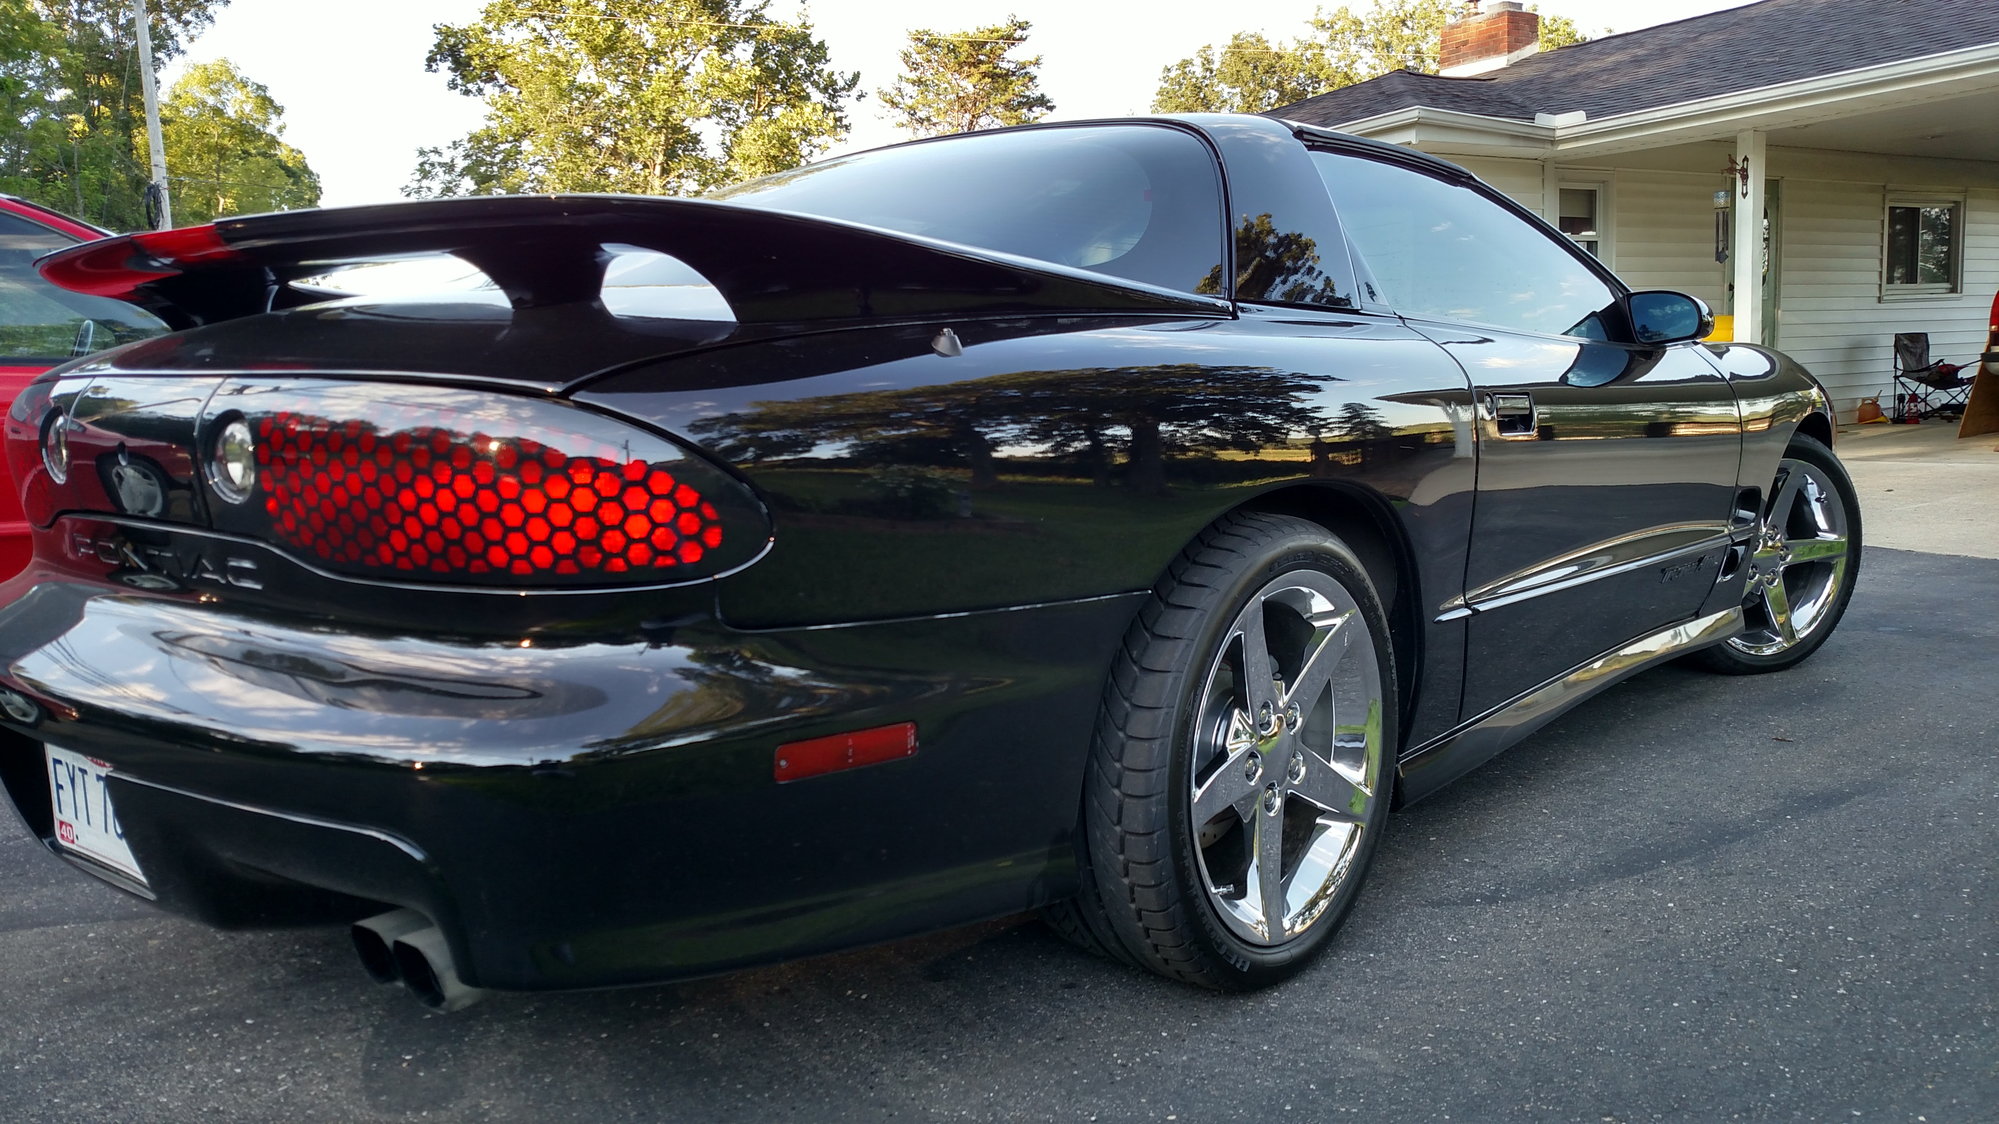 1999 Pontiac Firebird - 99 Trans Am 6spd. 75k miles - Used - VIN 2G2FV22G3X2200420 - 75,000 Miles - 8 cyl - 2WD - Manual - Coupe - Black - Chillocothe, OH 45601, United States